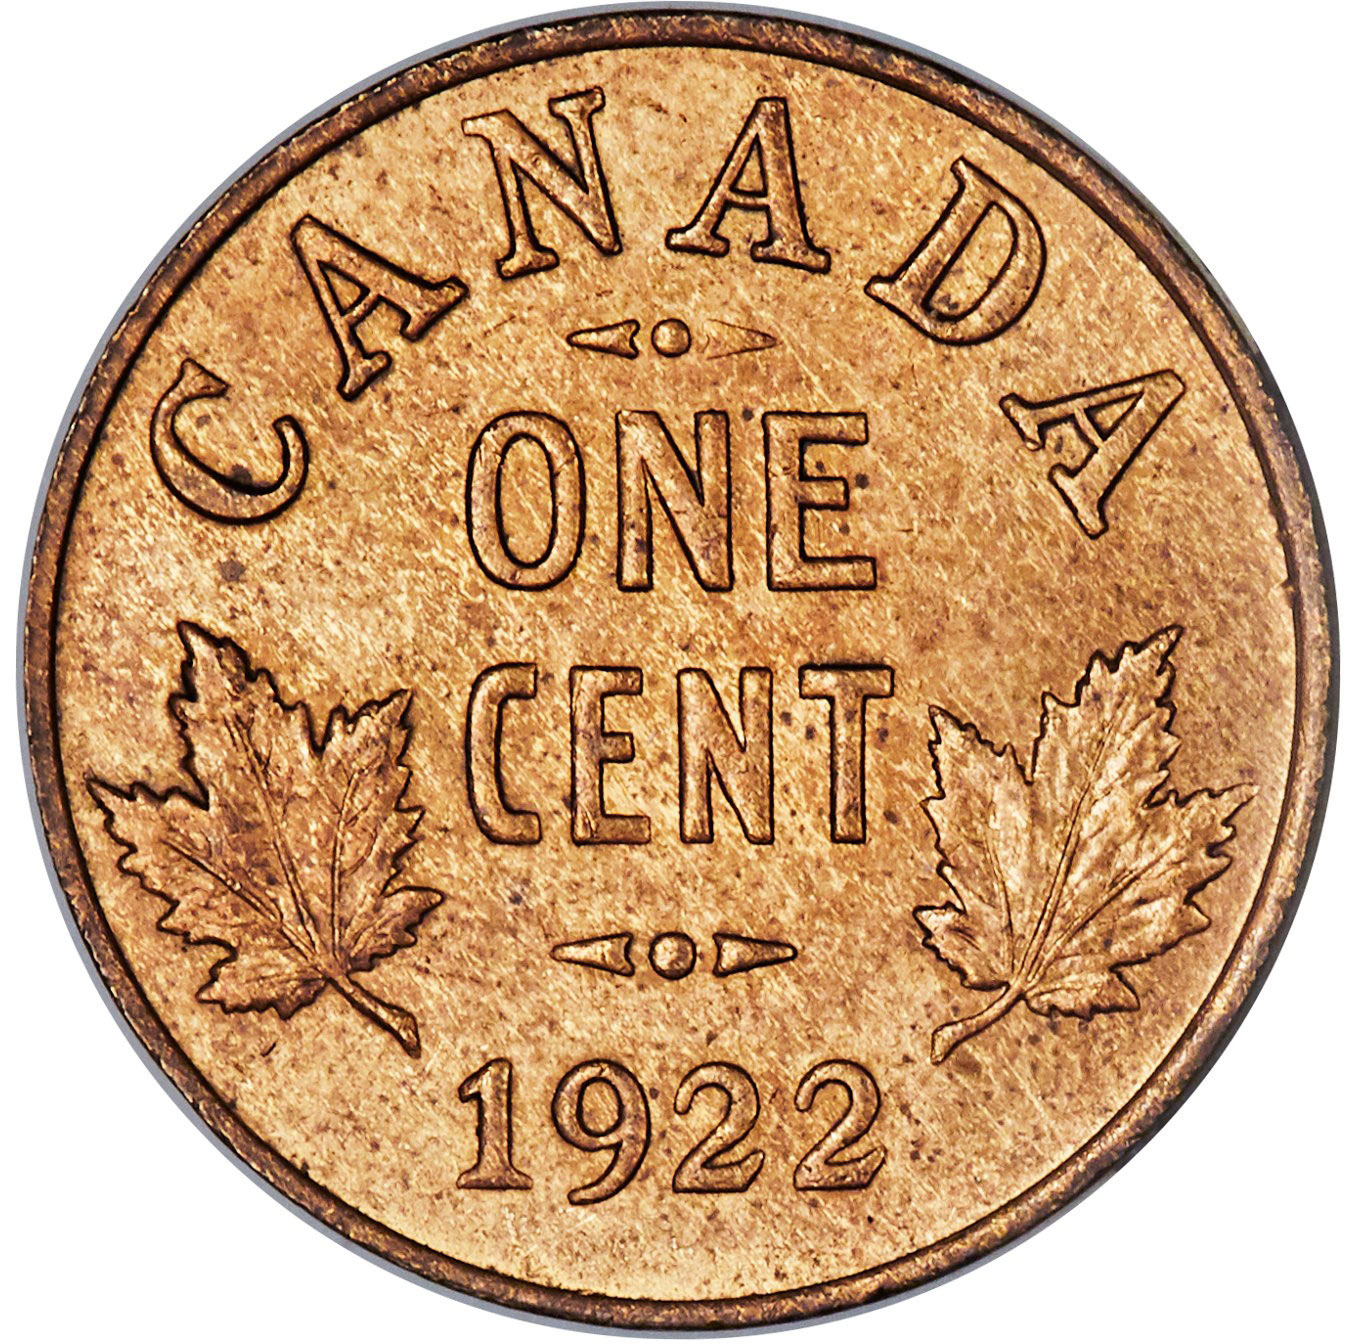 The Rarest Canada Small Cents & What They're Worth